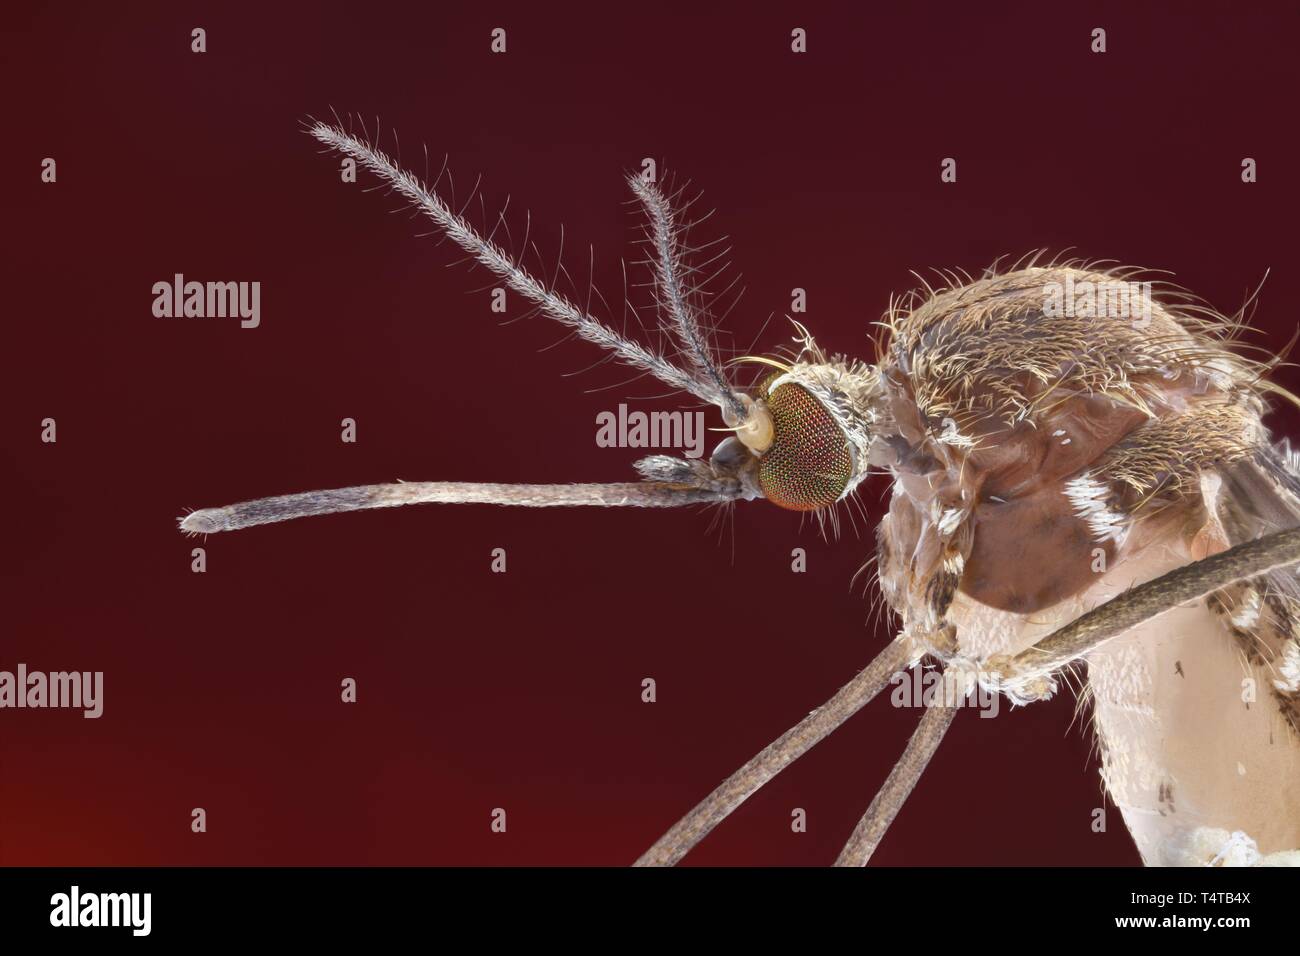 Lateral view of a mosquito (Culex pipiens) with outstretched proboscis Stock Photo